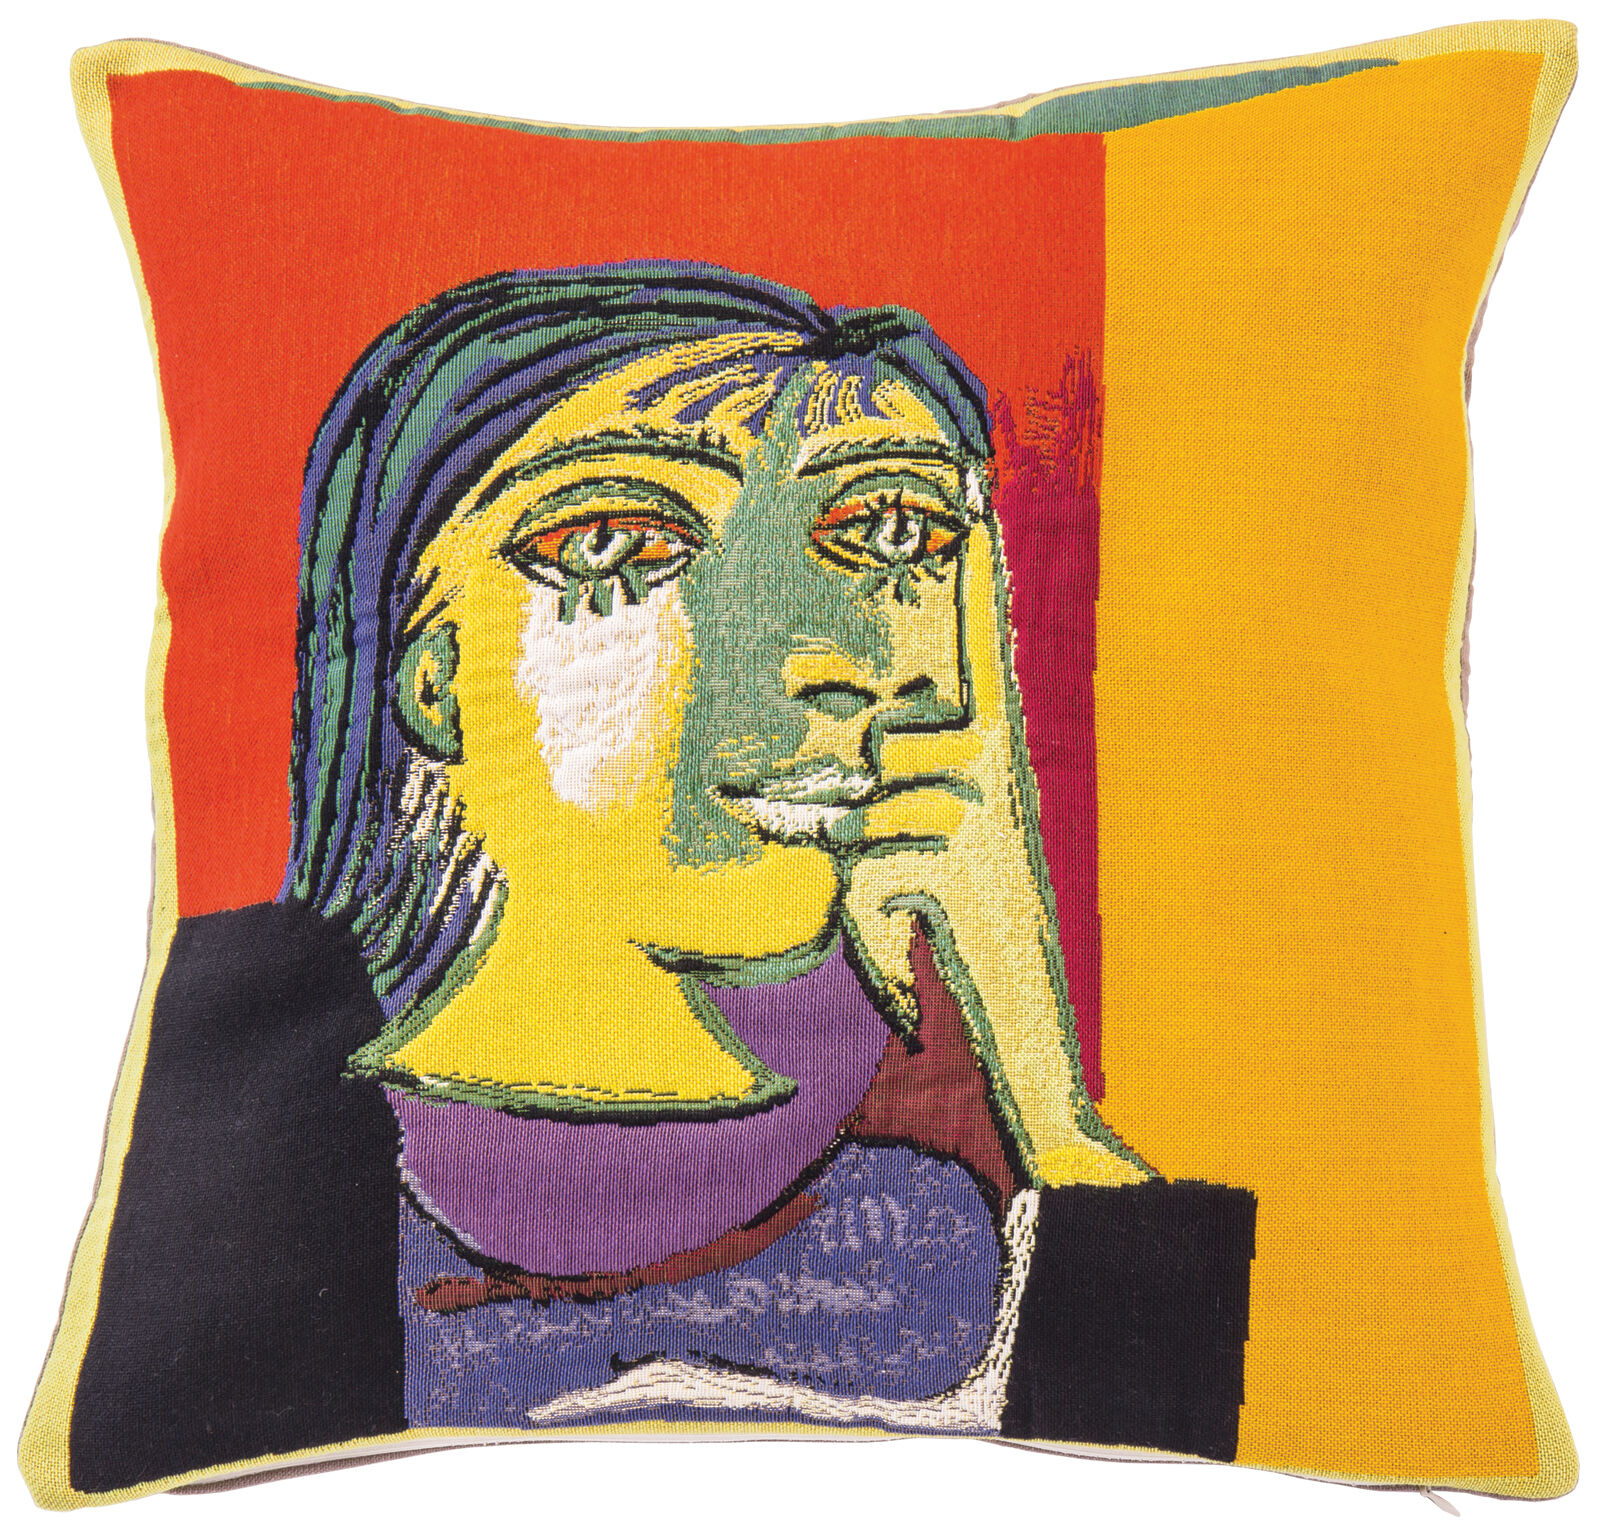 Cushion cover "Dora Maar" by Pablo Picasso